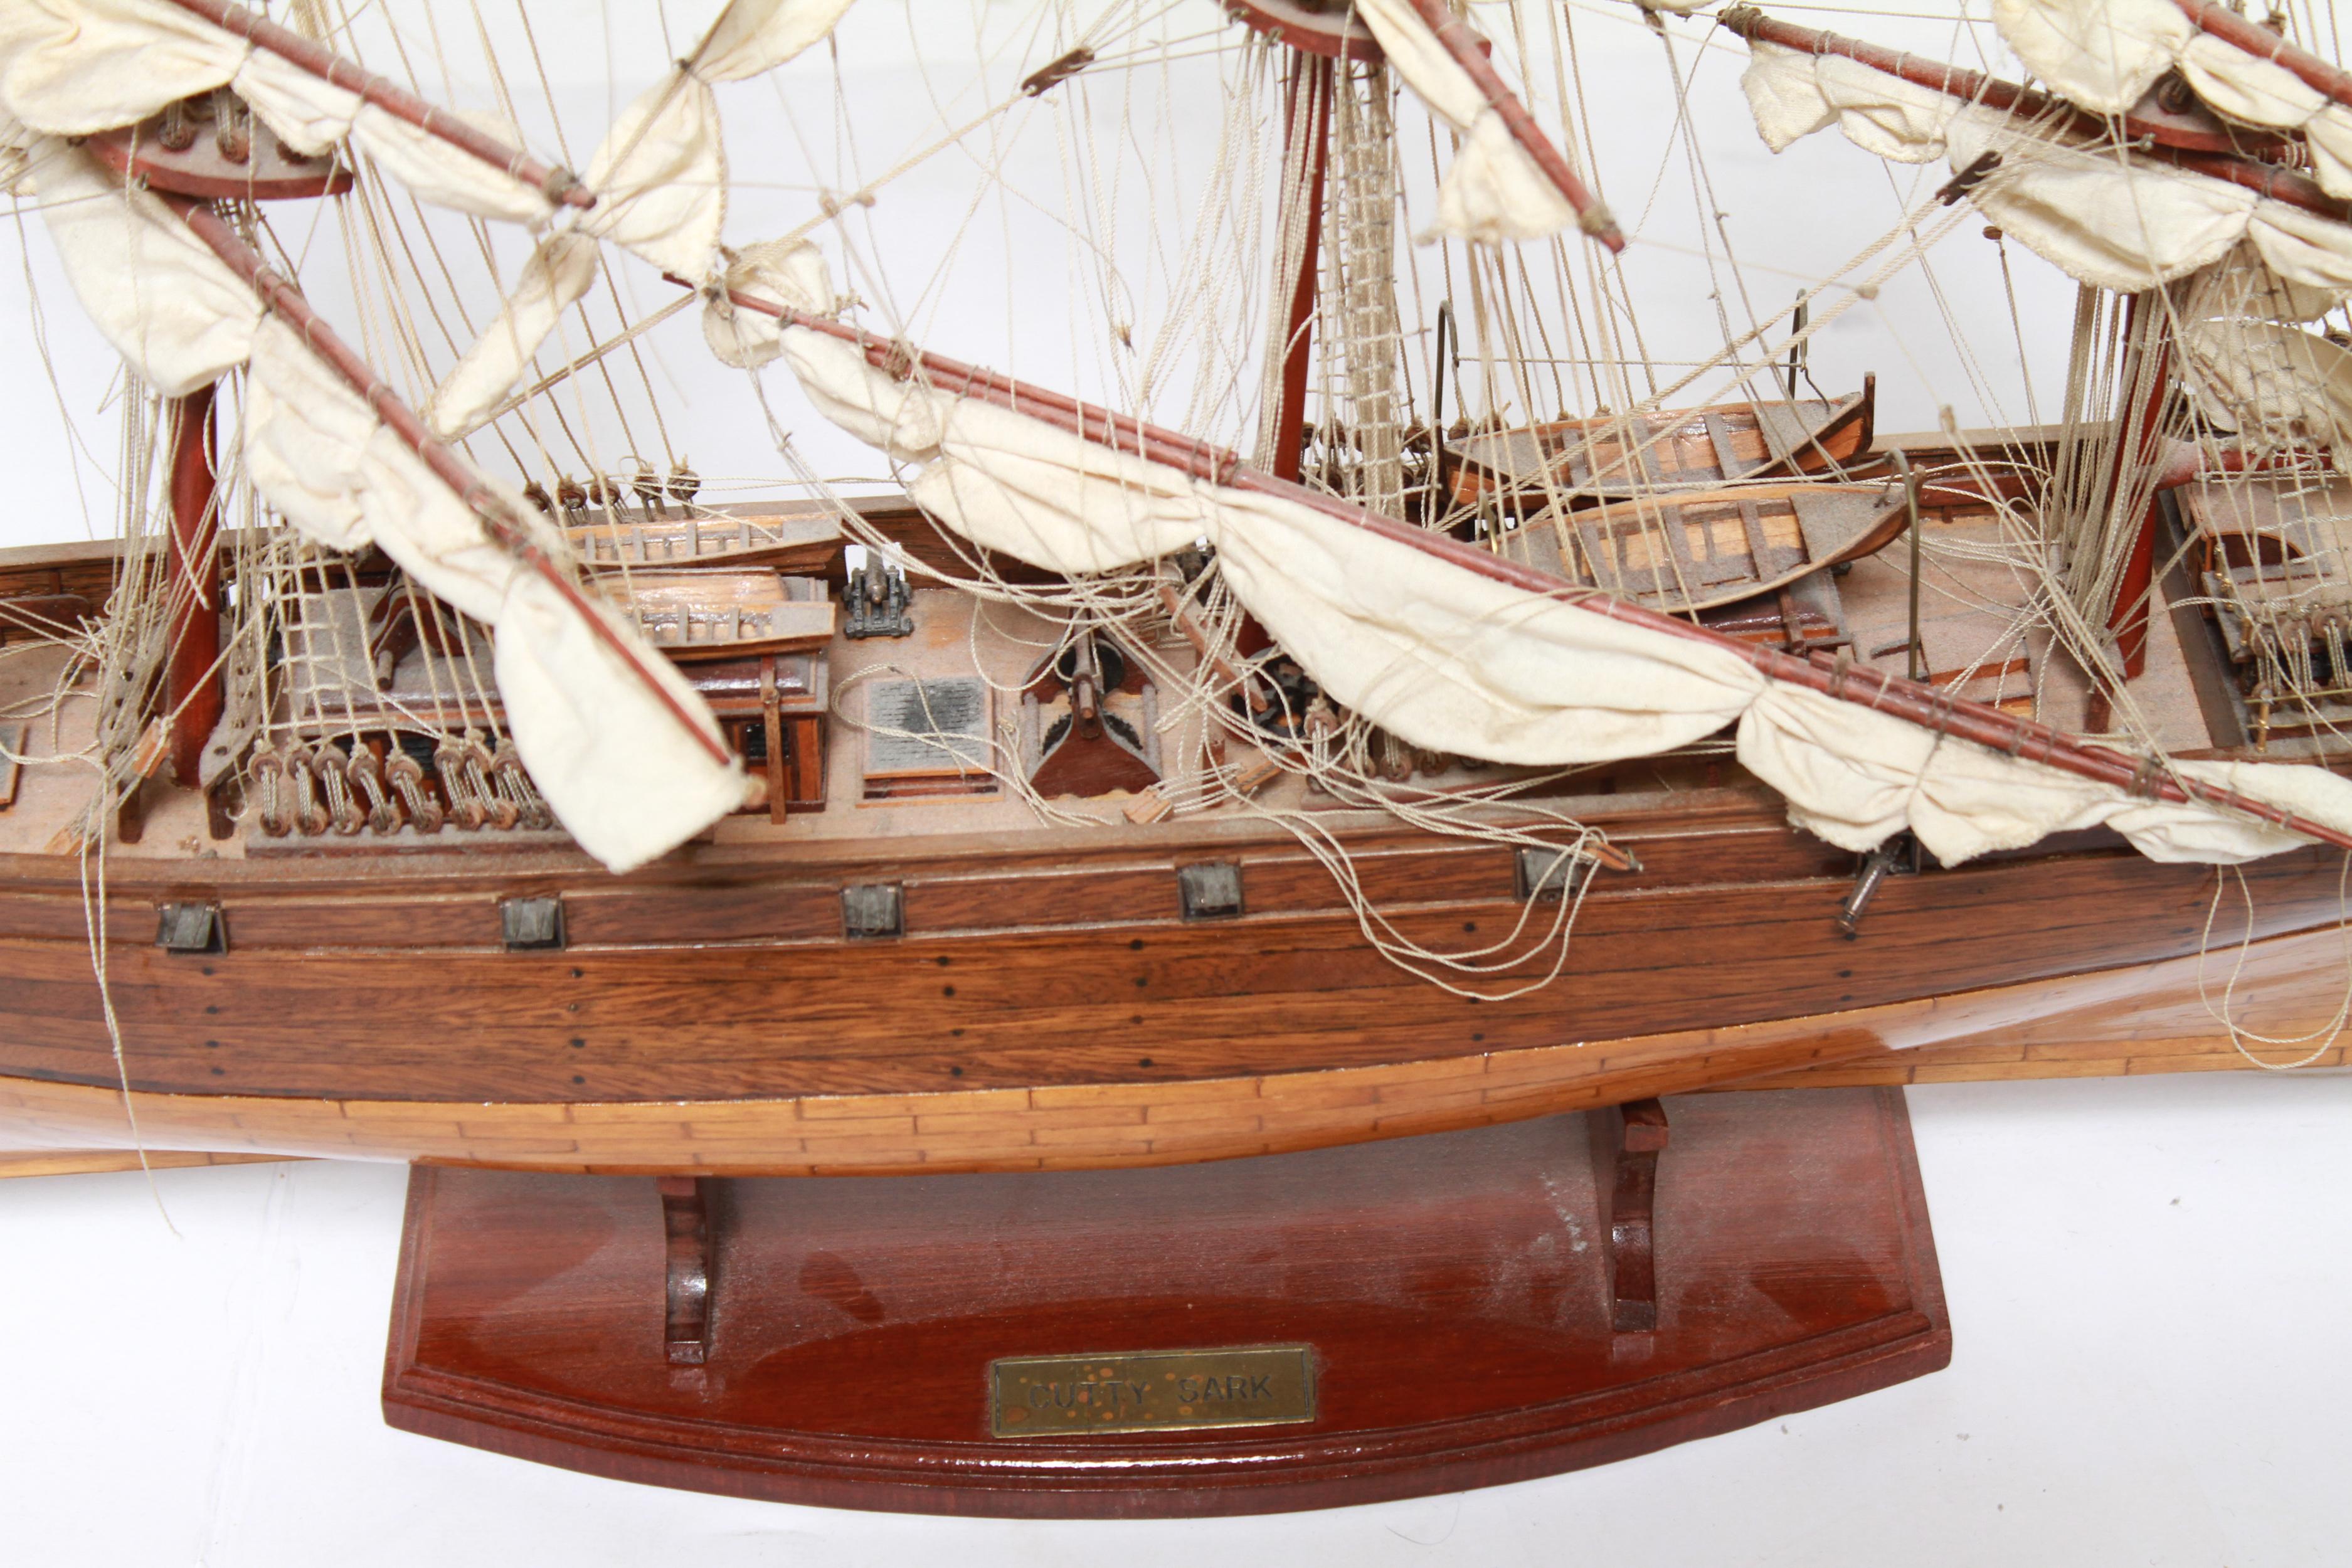 'Cutty Sark' china clipper three-mast tall scale model in teak, mahogany, ebony and other woods, with linen sails and cotton thread rigging, on stand with brass name plate. Lacking two cannons on one side. Needs re-rigging.